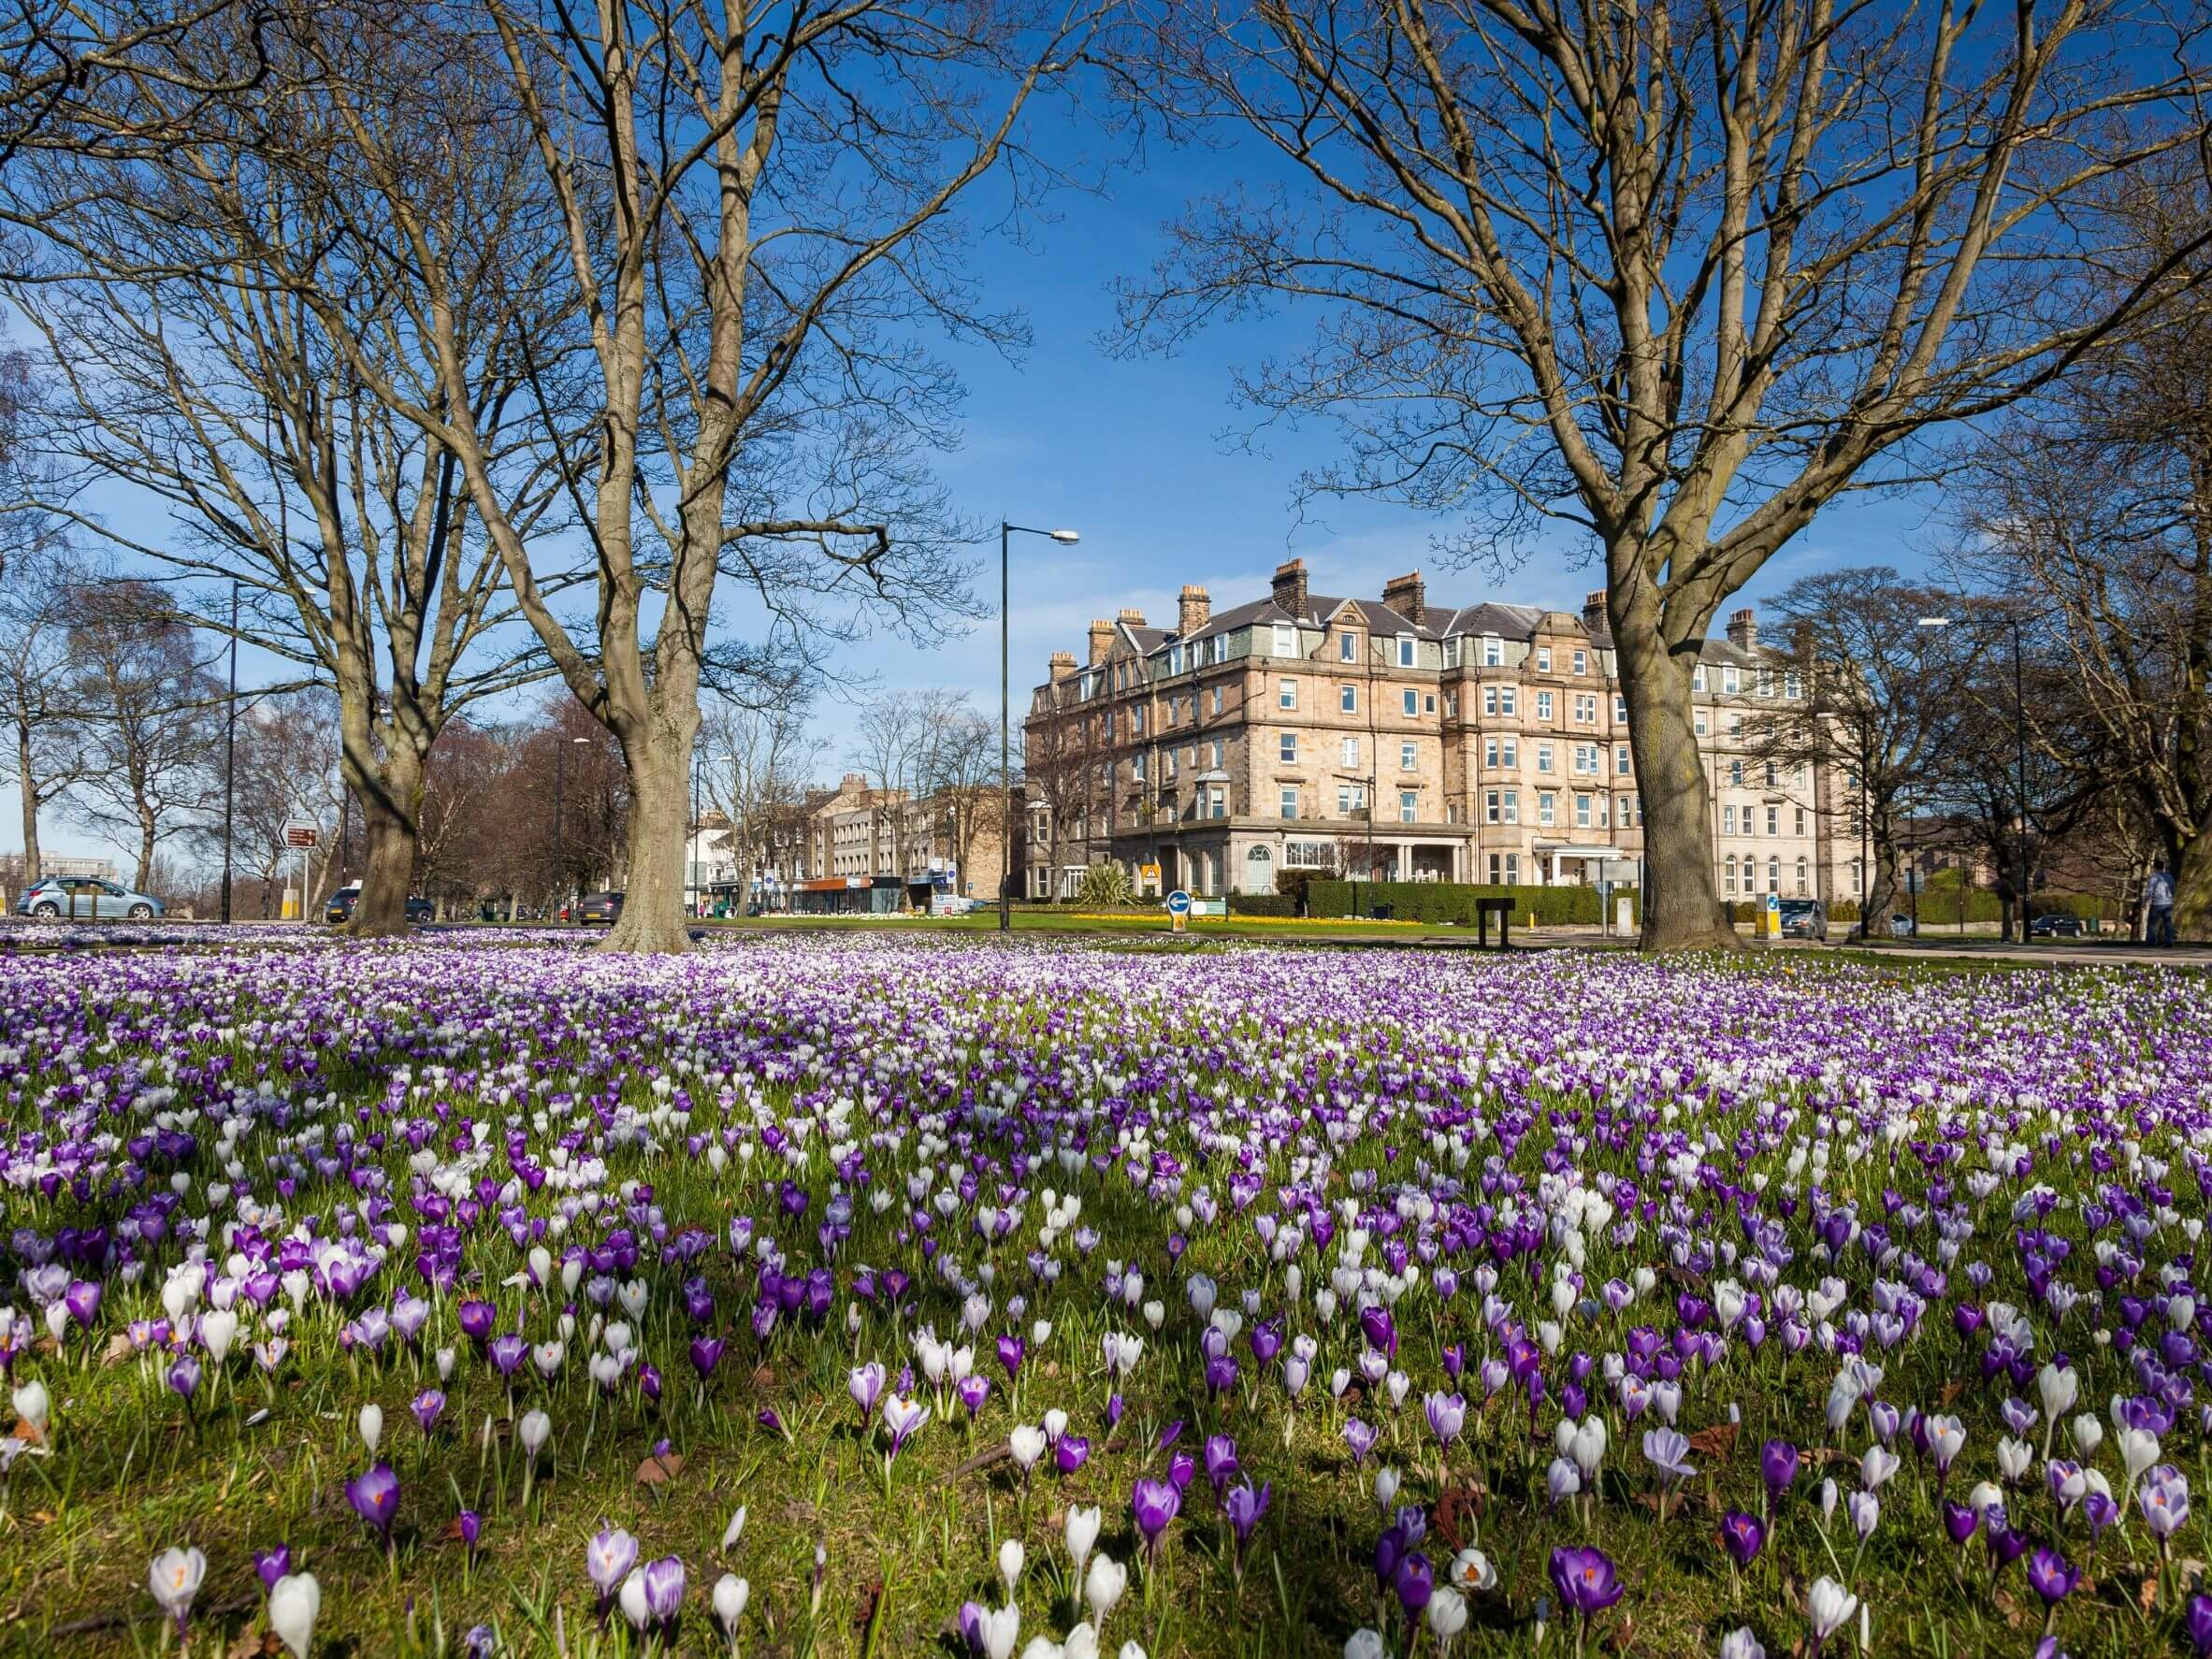 19 Amazing Things to Do in Harrogate on a Day Out